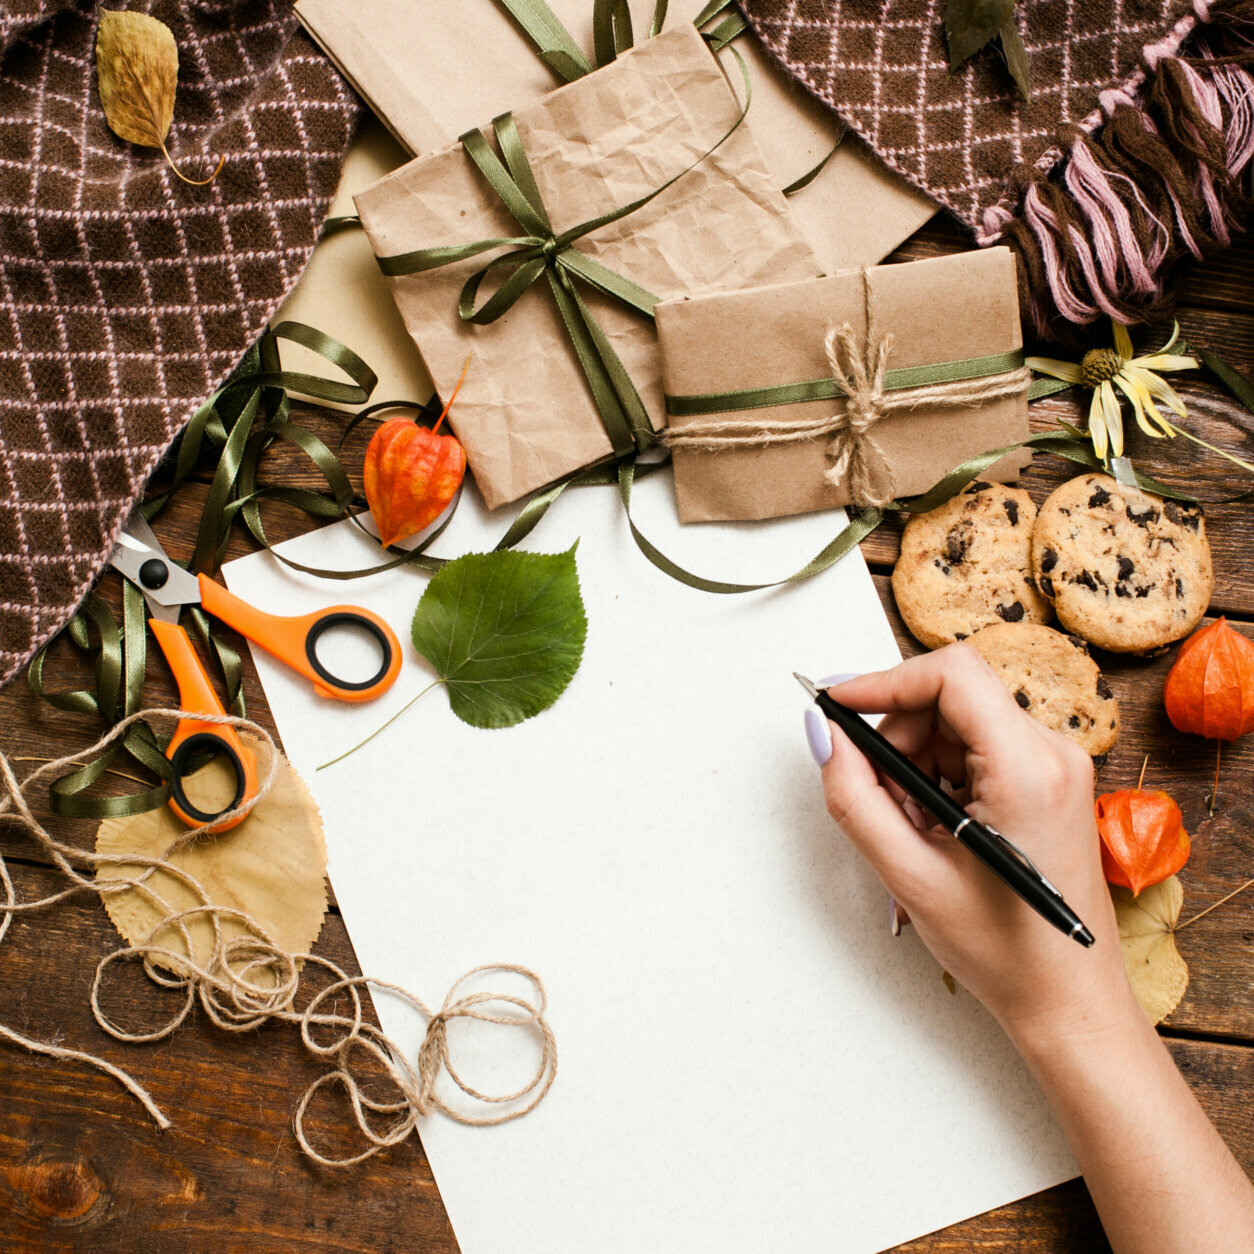 Autumn holidays and preparing presents, top view. Unrecognizable woman writing check list on wooden table near small wrapped gifts, chocolate cookies, scissor and bands laying on warm cozy plaid